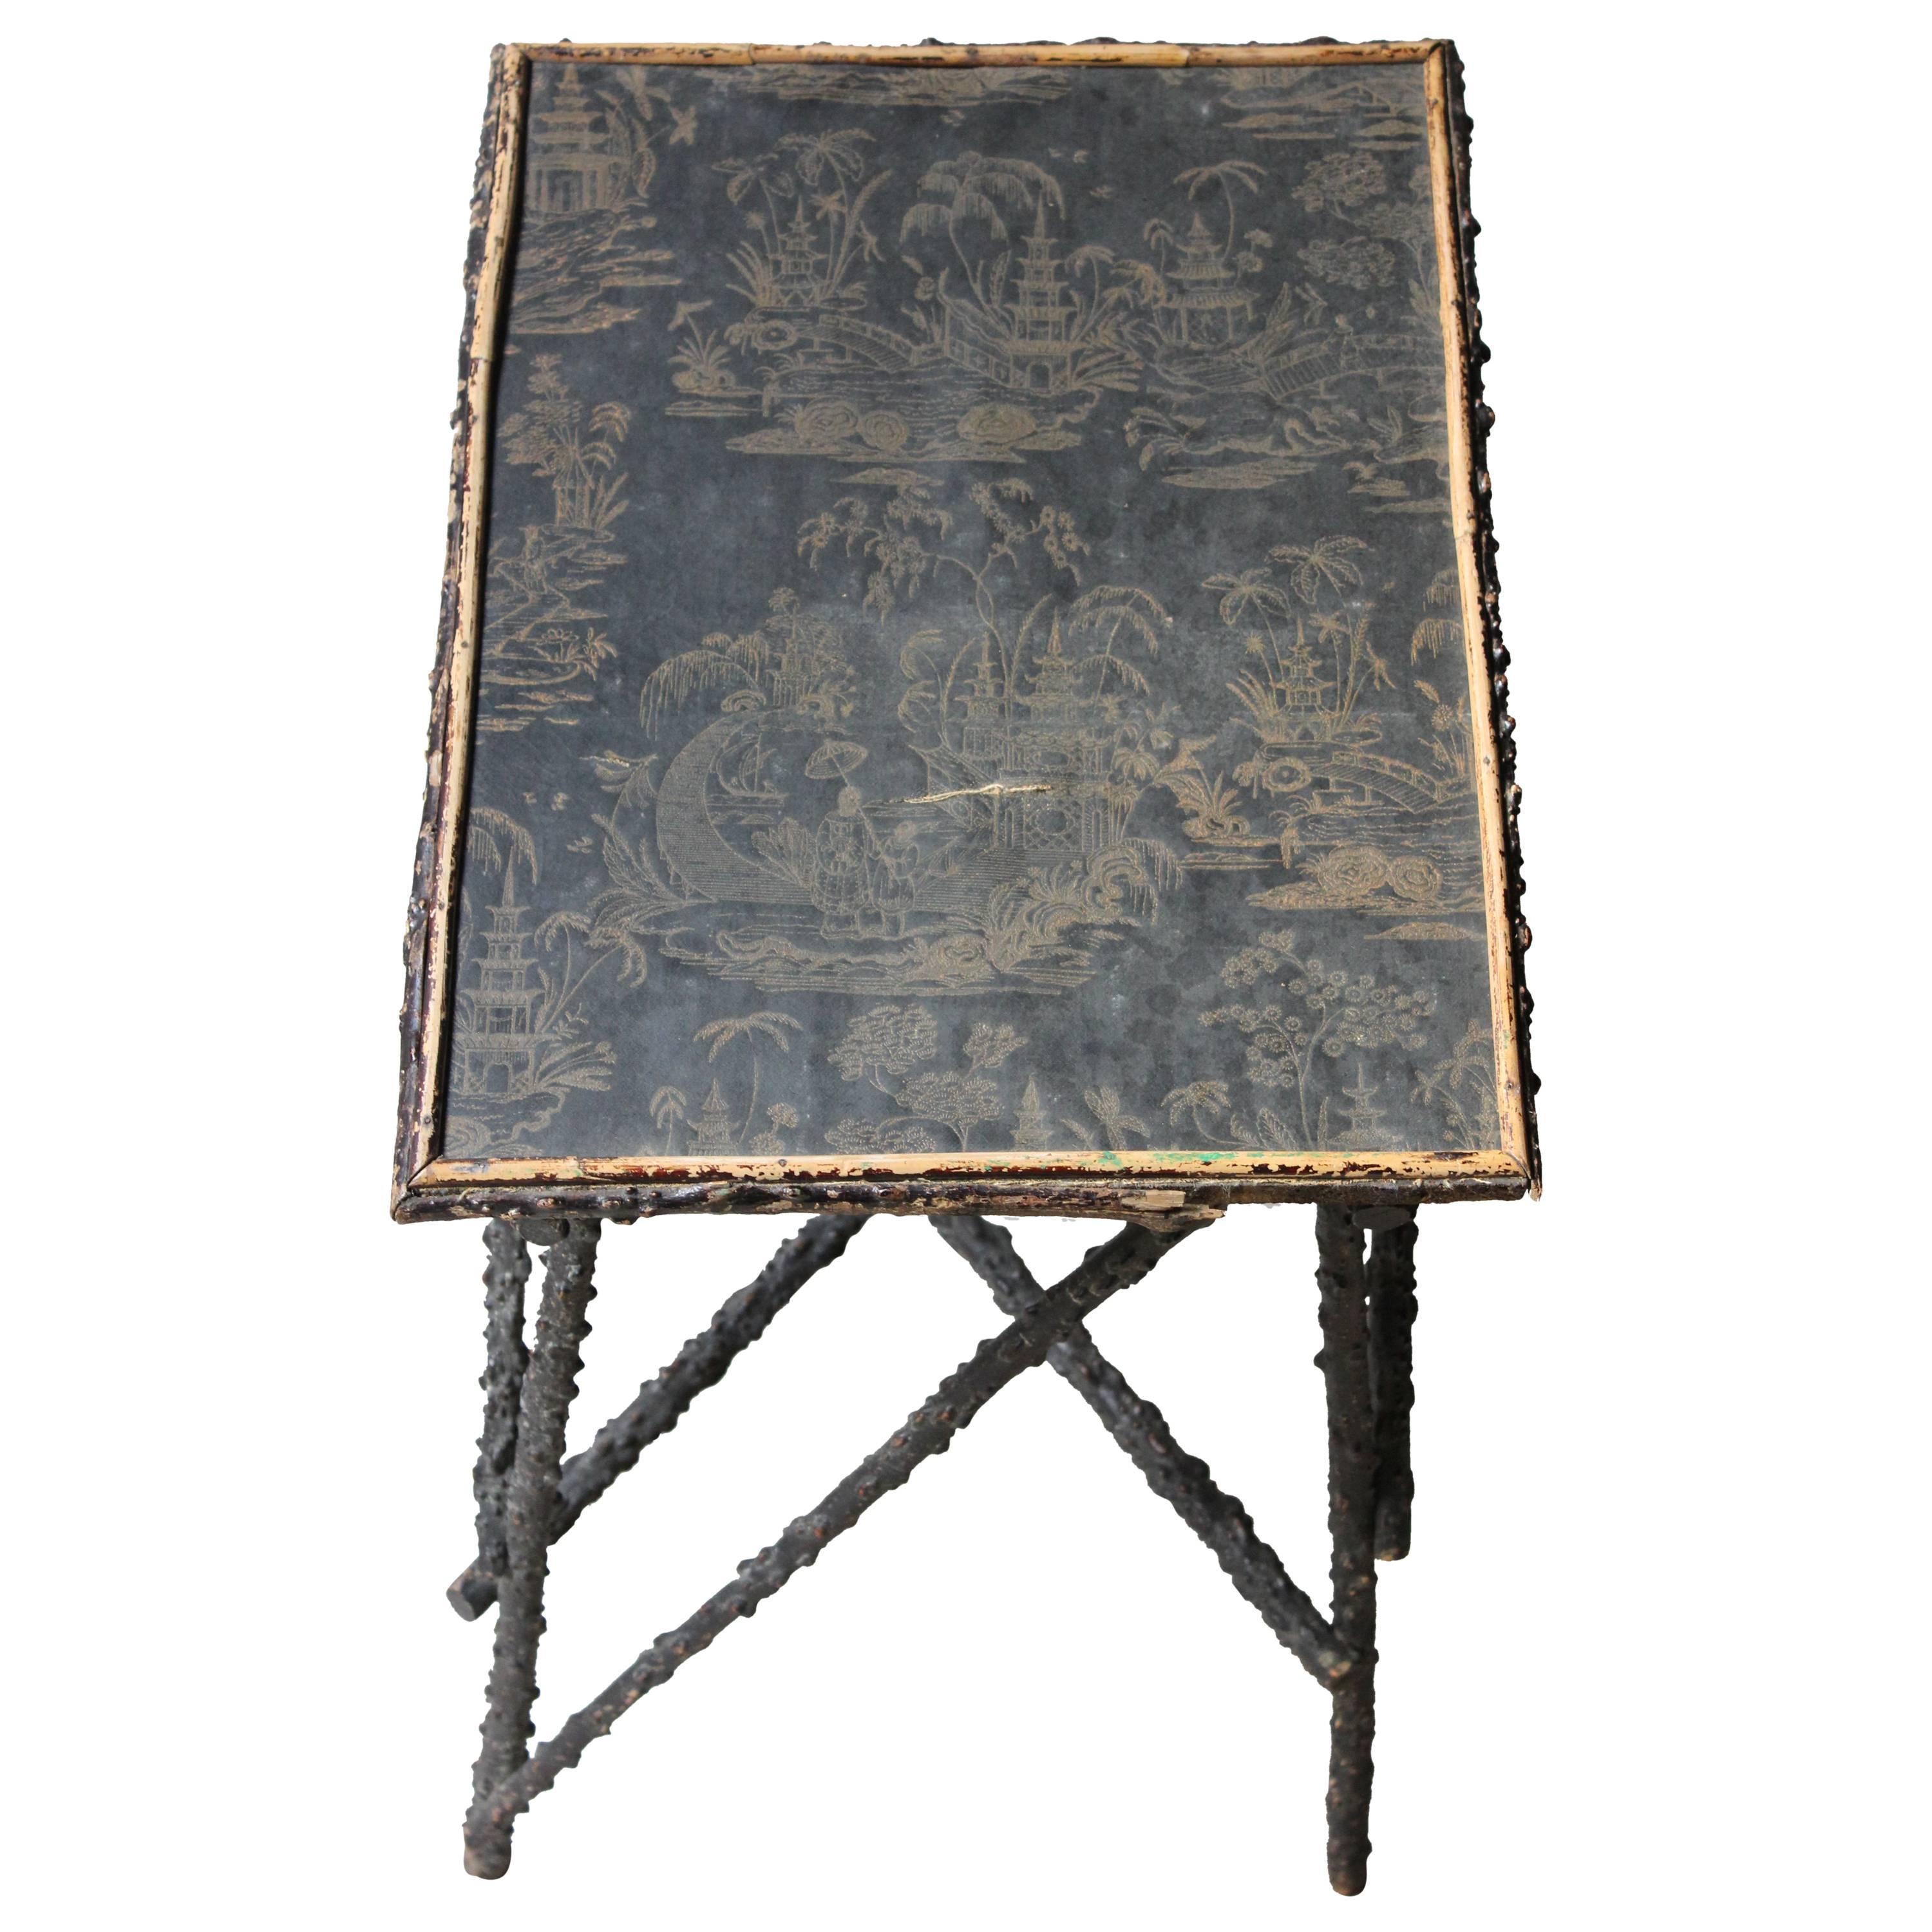 Very Pretty circa 1860-1880 Ebonized and Chinoiserie Decorated Twig Table